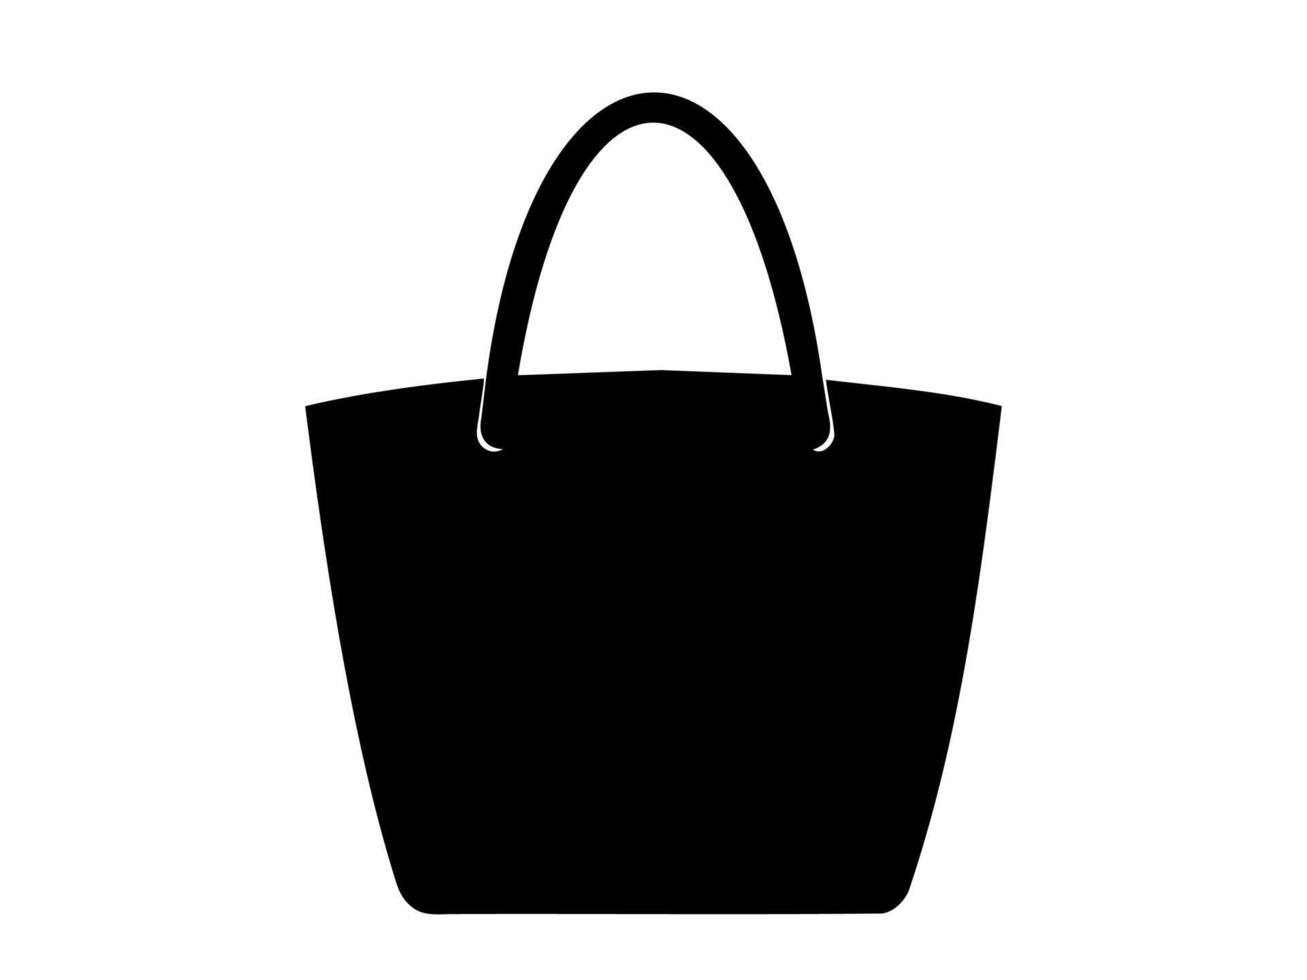 Black tote bag silhouette. Art. Simple monochrome shopping bag icon. Minimalist design. Logo, pictogram, sign, print. Concept of reusable bags, eco-friendly shopping. Isolated on white surface vector